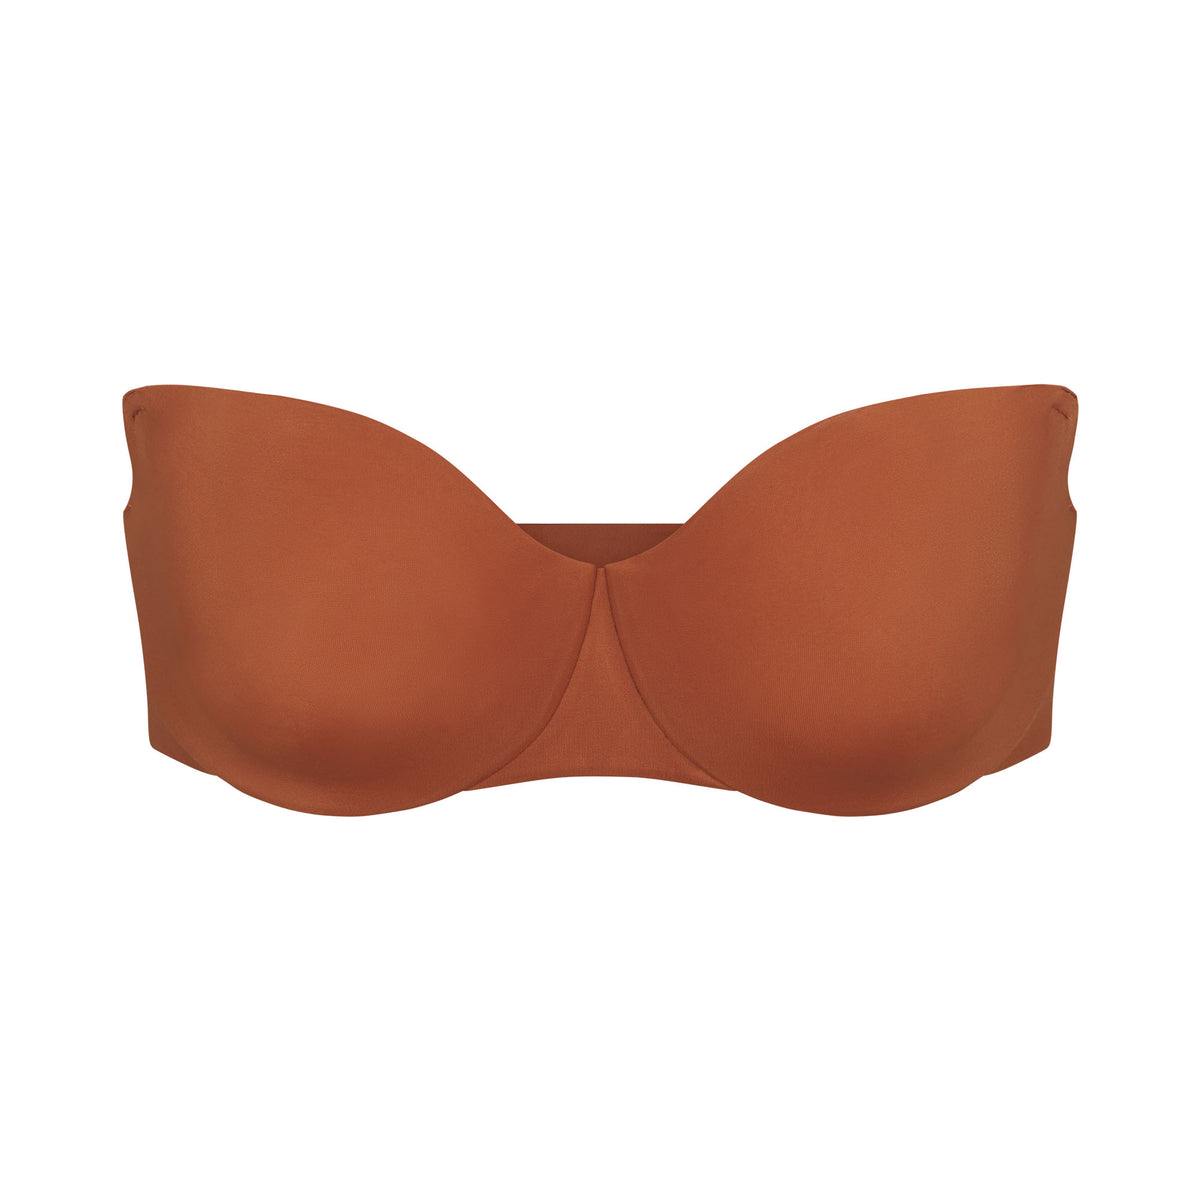 Bra Technology Innovations: Enhancing Comfort and Support, by Hsia  Lingerie